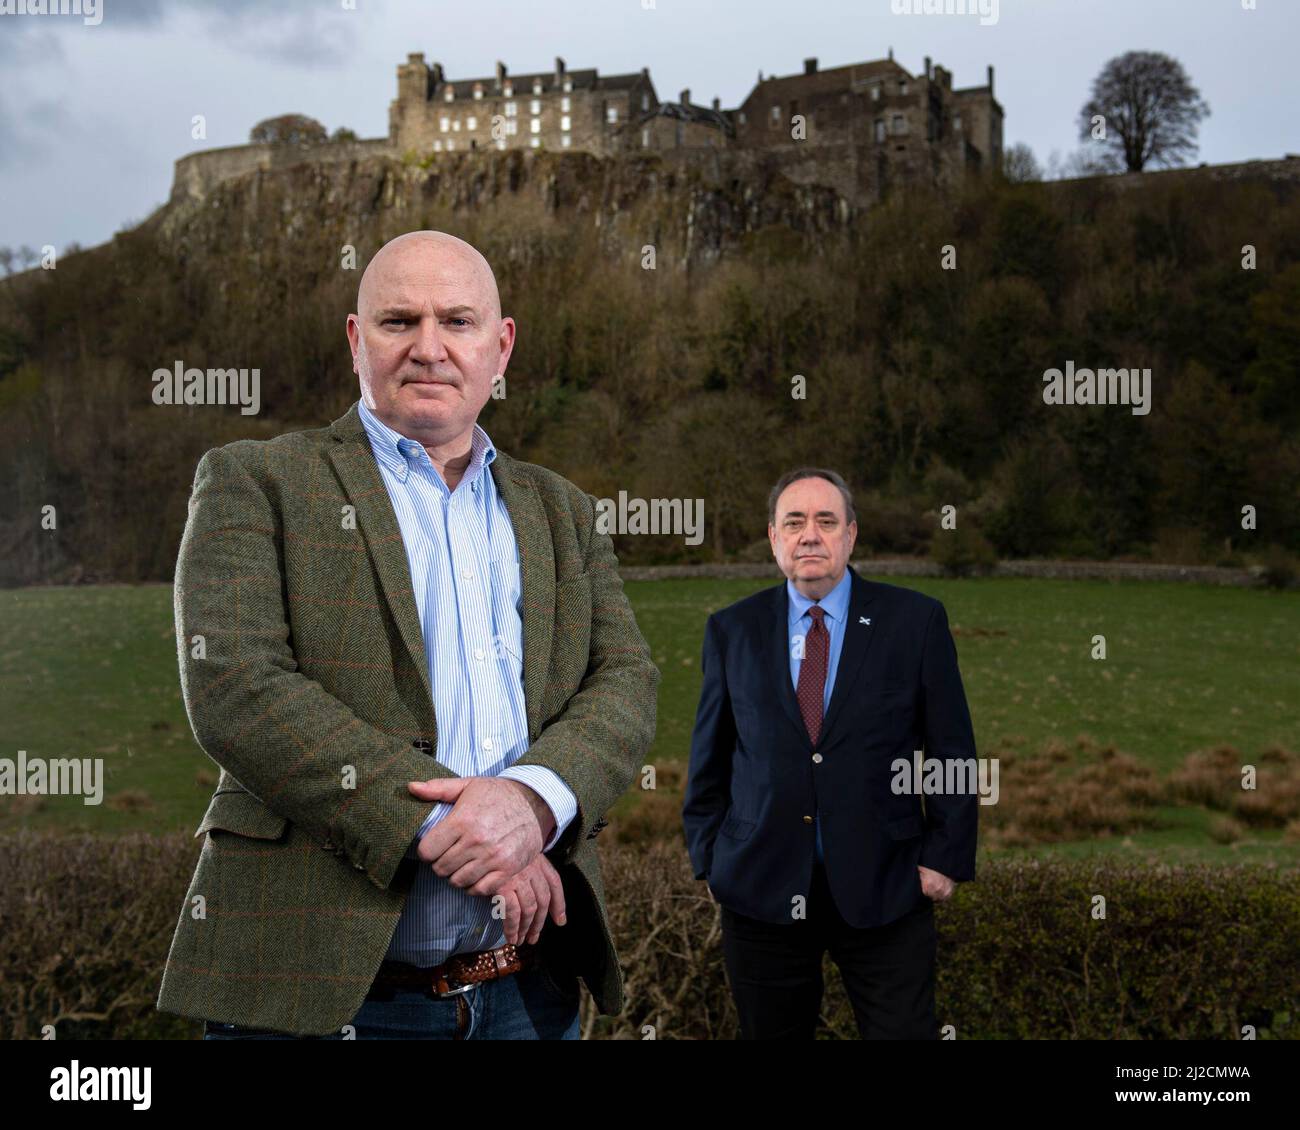 Stirling, Scotland, UK. 13 April 2021.  PICTURED: (L-R) Neale Hanvey MP; Rt Hon Alex Salmond - Alba Party Leader. Alba Party Leader, Rt Hon Alex Salmond unveils his candidates for Mid Scotland and Fife region.  Credit: Colin Fisher/Alamy Live News Stock Photo